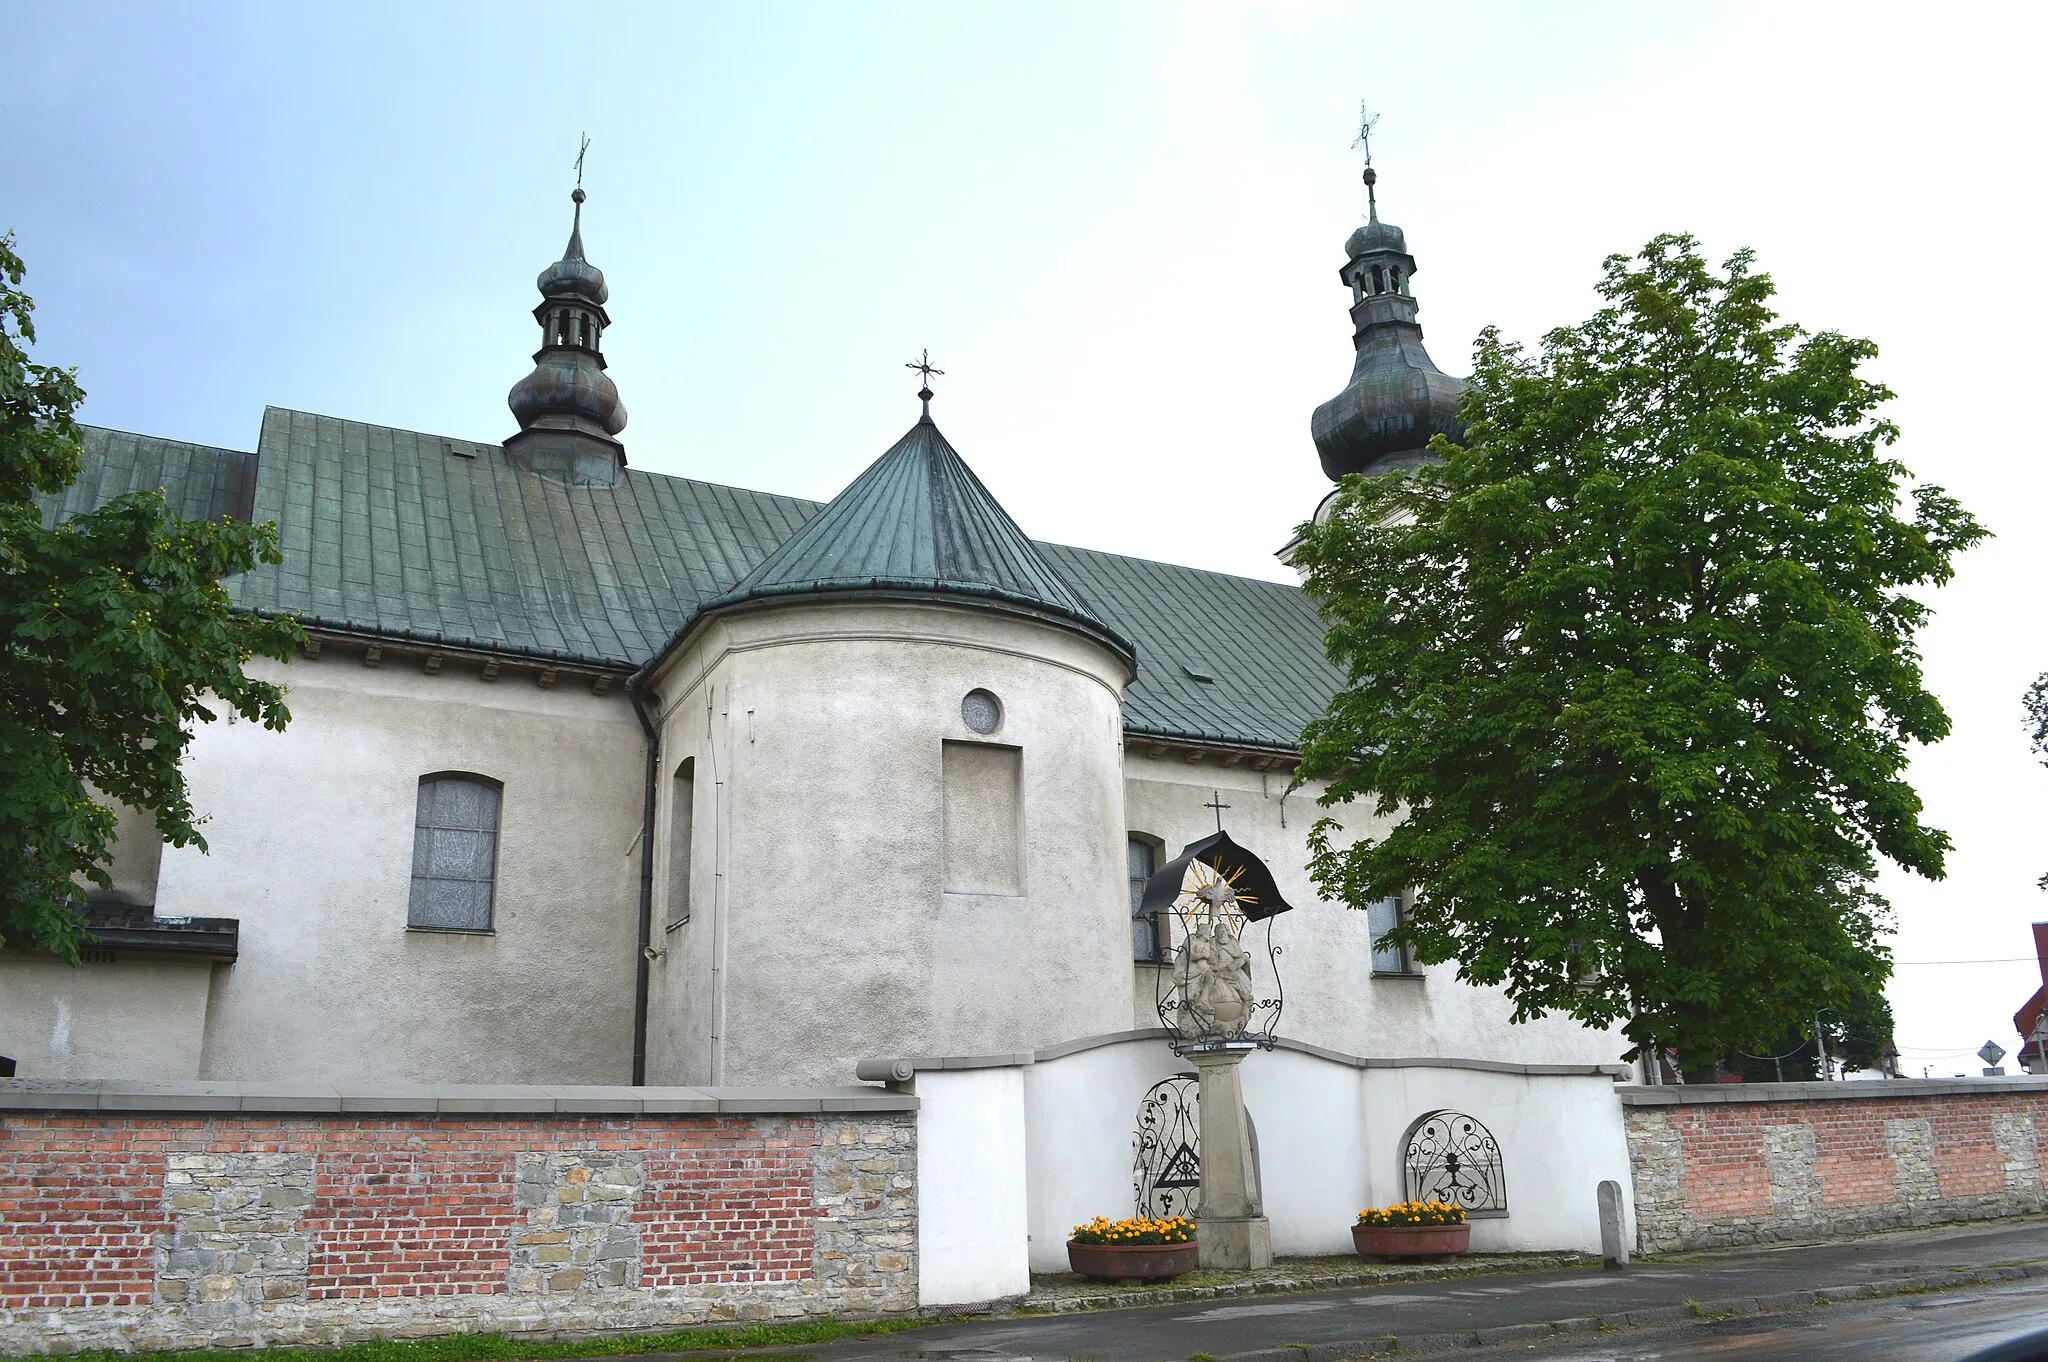 Photo showing: Holy Trinity Church in Czarny Dunajec.
The Scotch Mist Gallery contains many photographs of historic buildings, monuments and memorials of Poland.